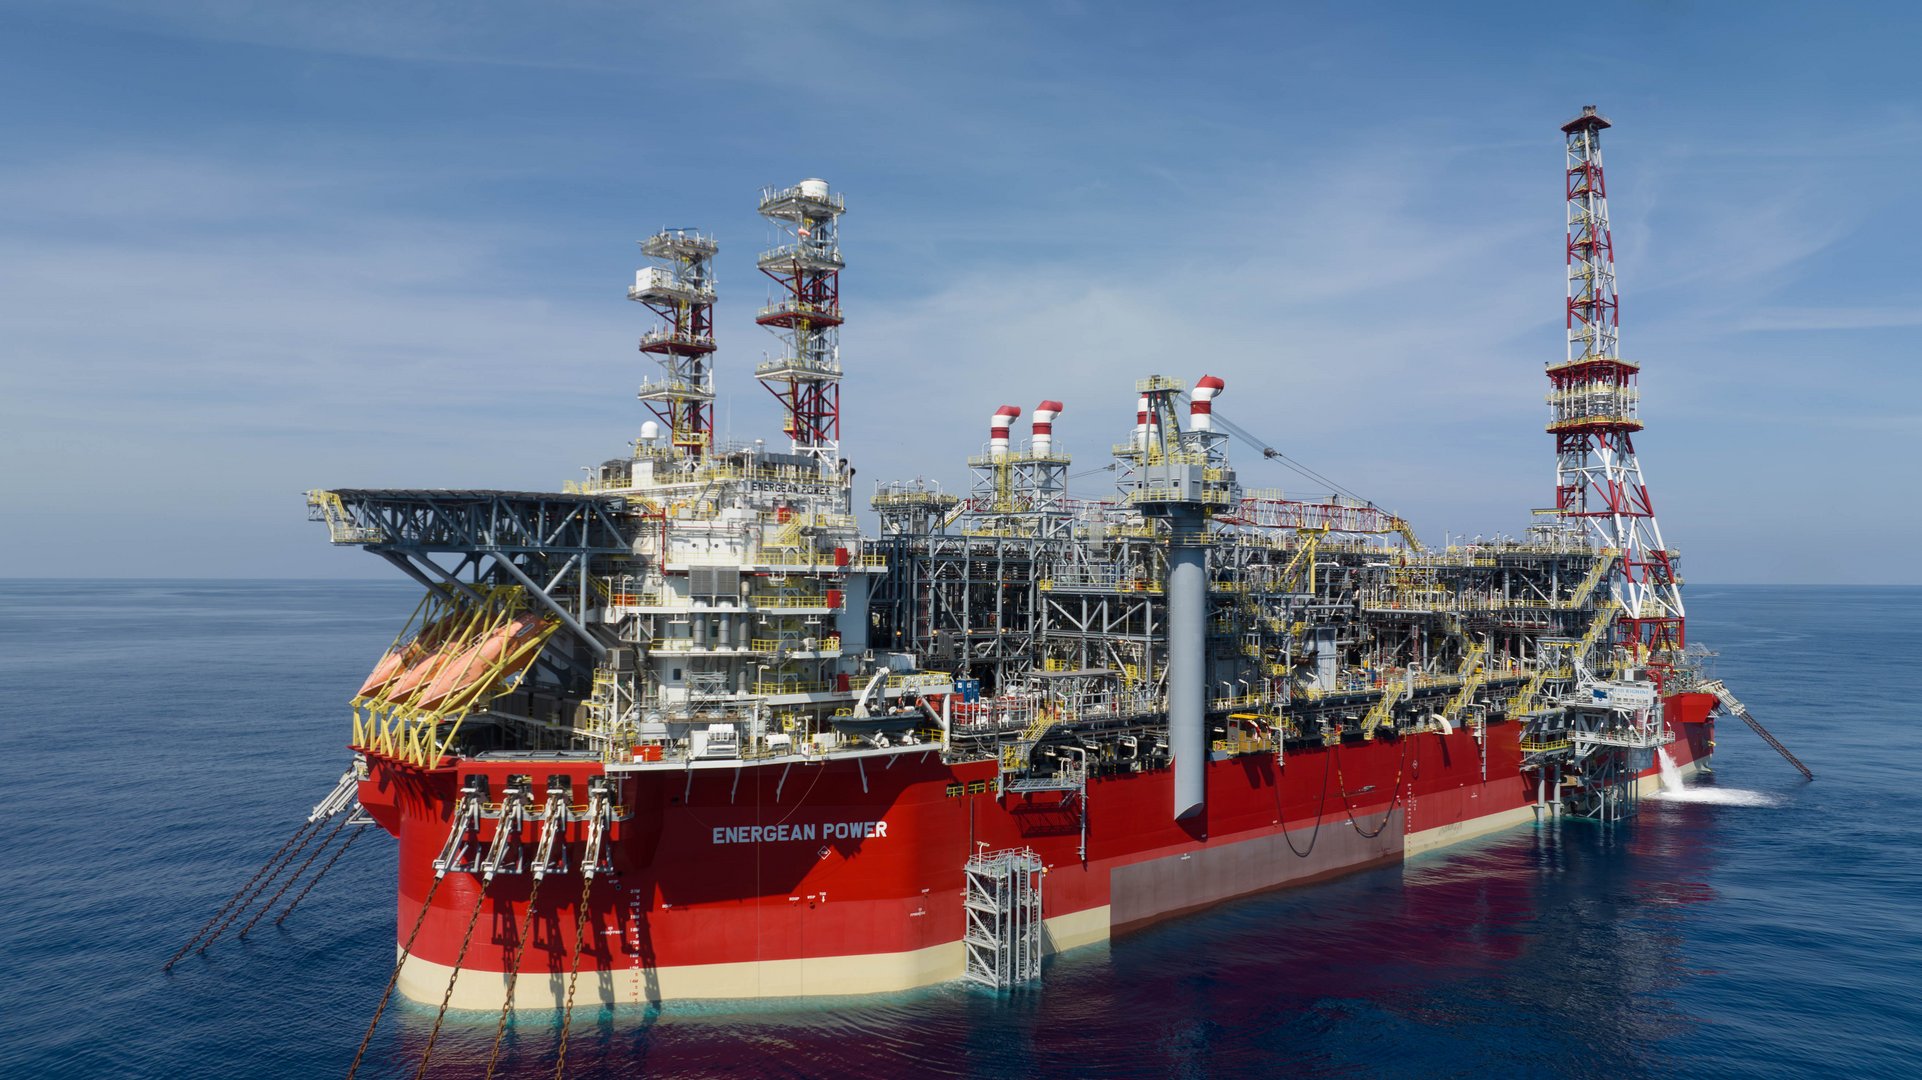 image Regional conflict has not affected gas production, Energean CEO says